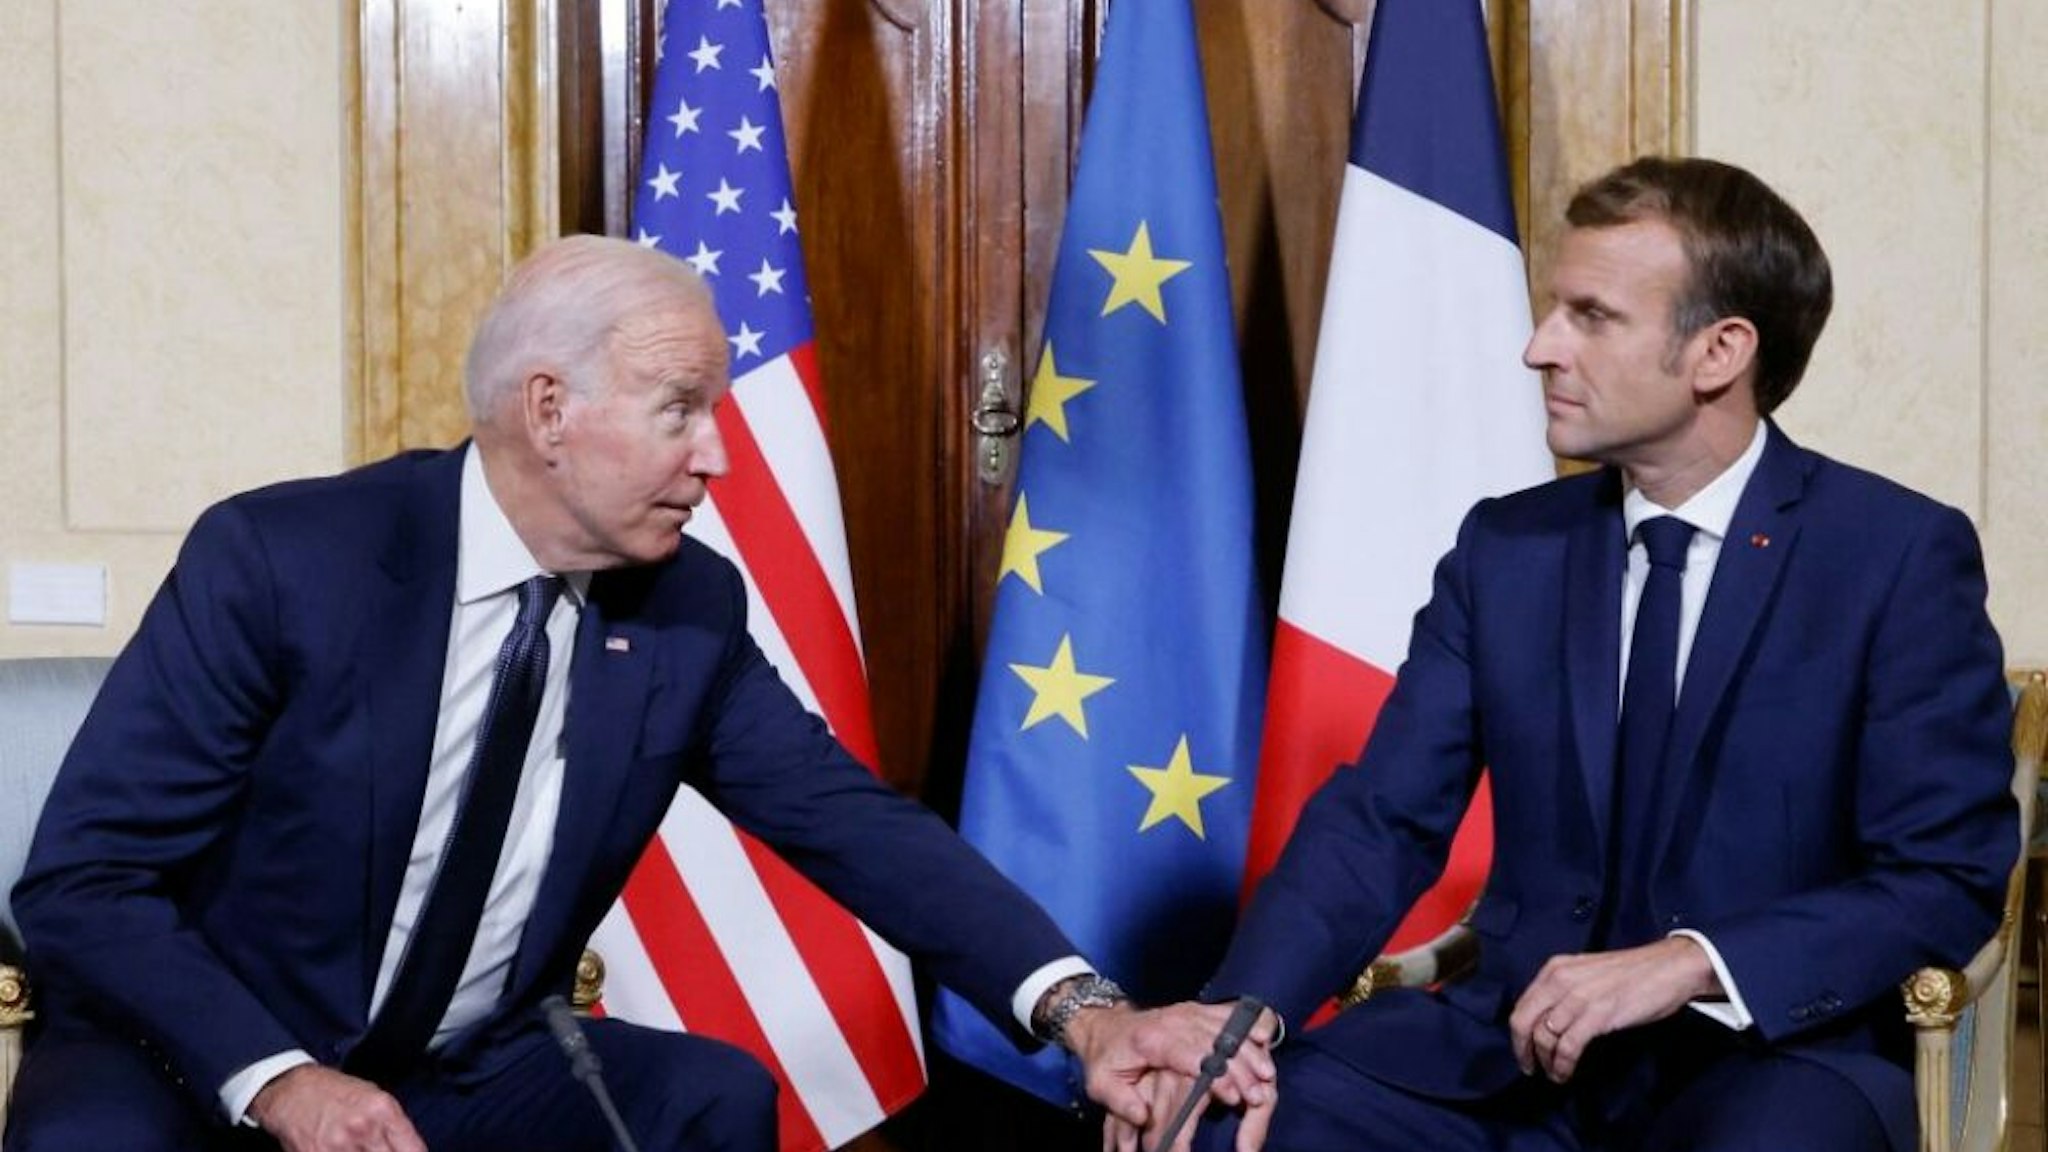 French President Emmanuel Macron (R) and US President Joe Biden (L) meet at the French Embassy to the Vatican in Rome on October 29, 2021.